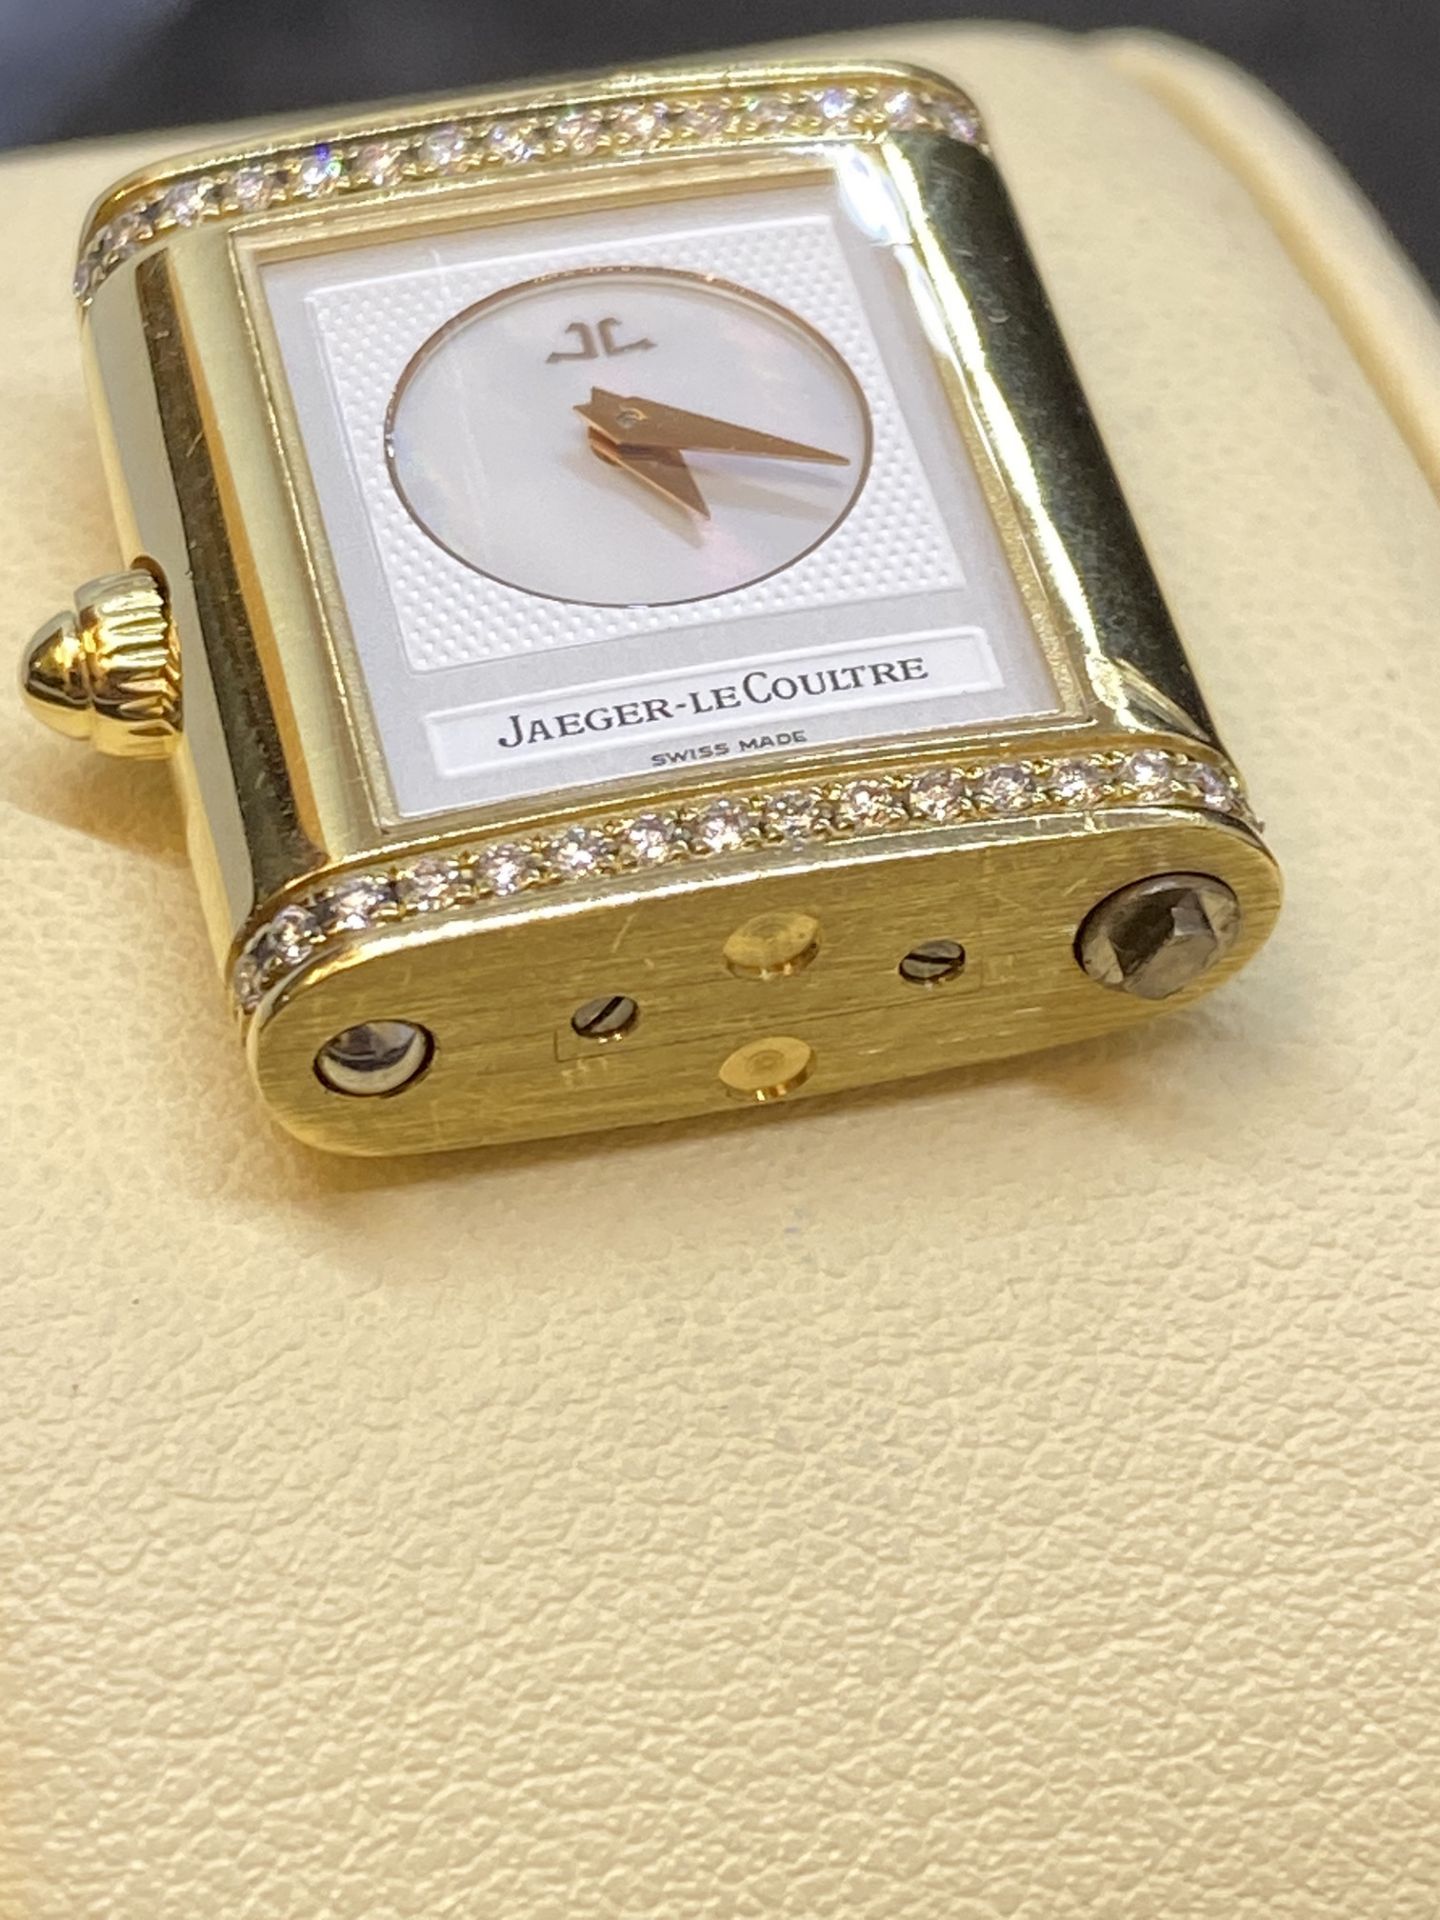 JAEGER LECOULTRE REVERSIBLE 18ct GOLD & DIAMOND WATCH BODY - Image 3 of 9